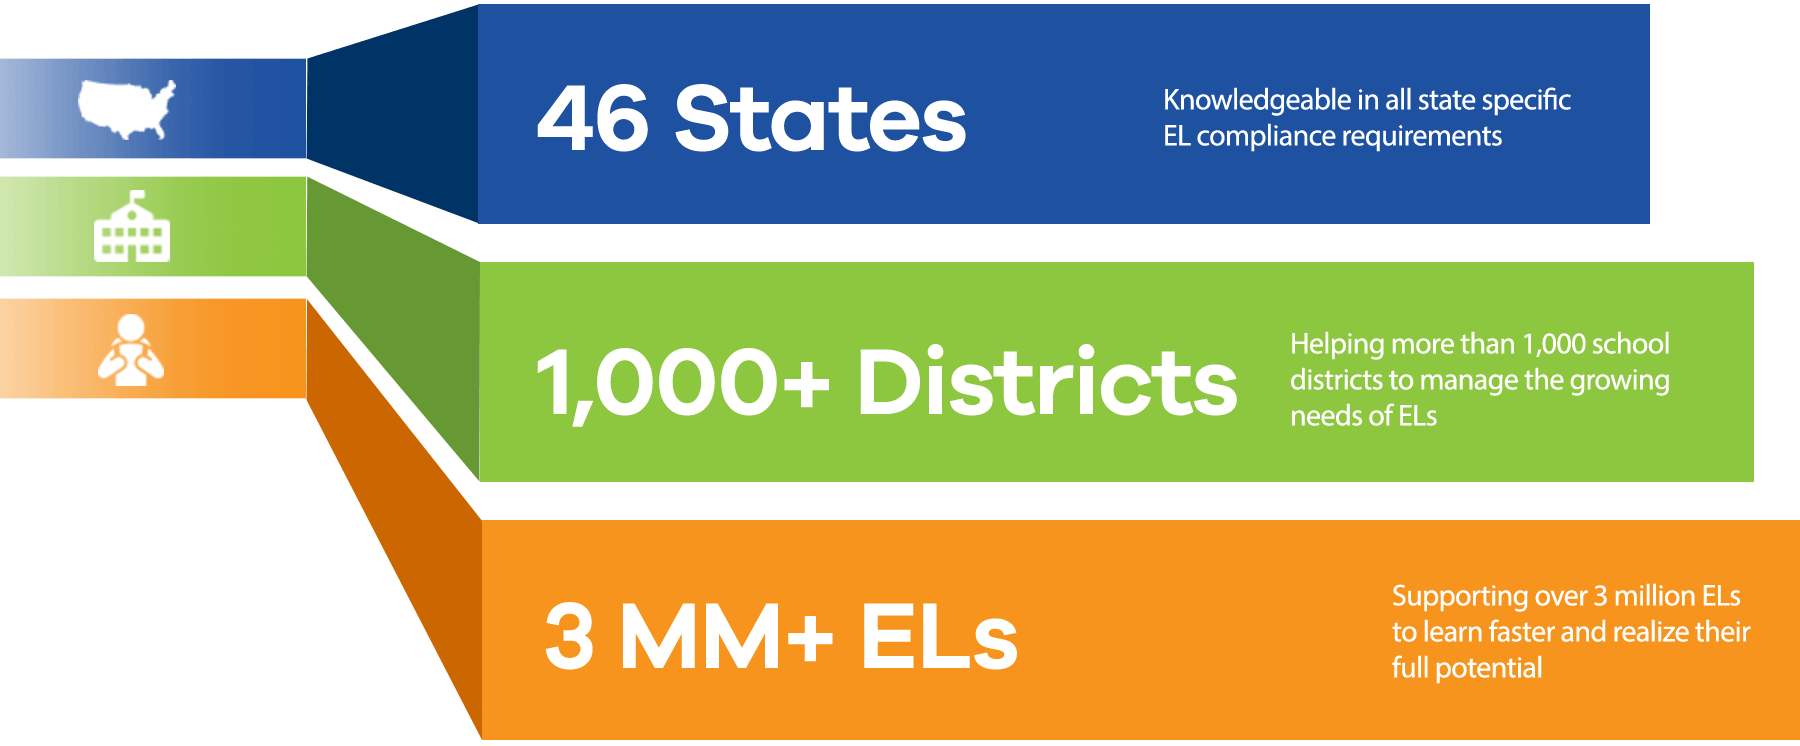 46 States / 1,000+ Districts / 3 MM+ ELL's